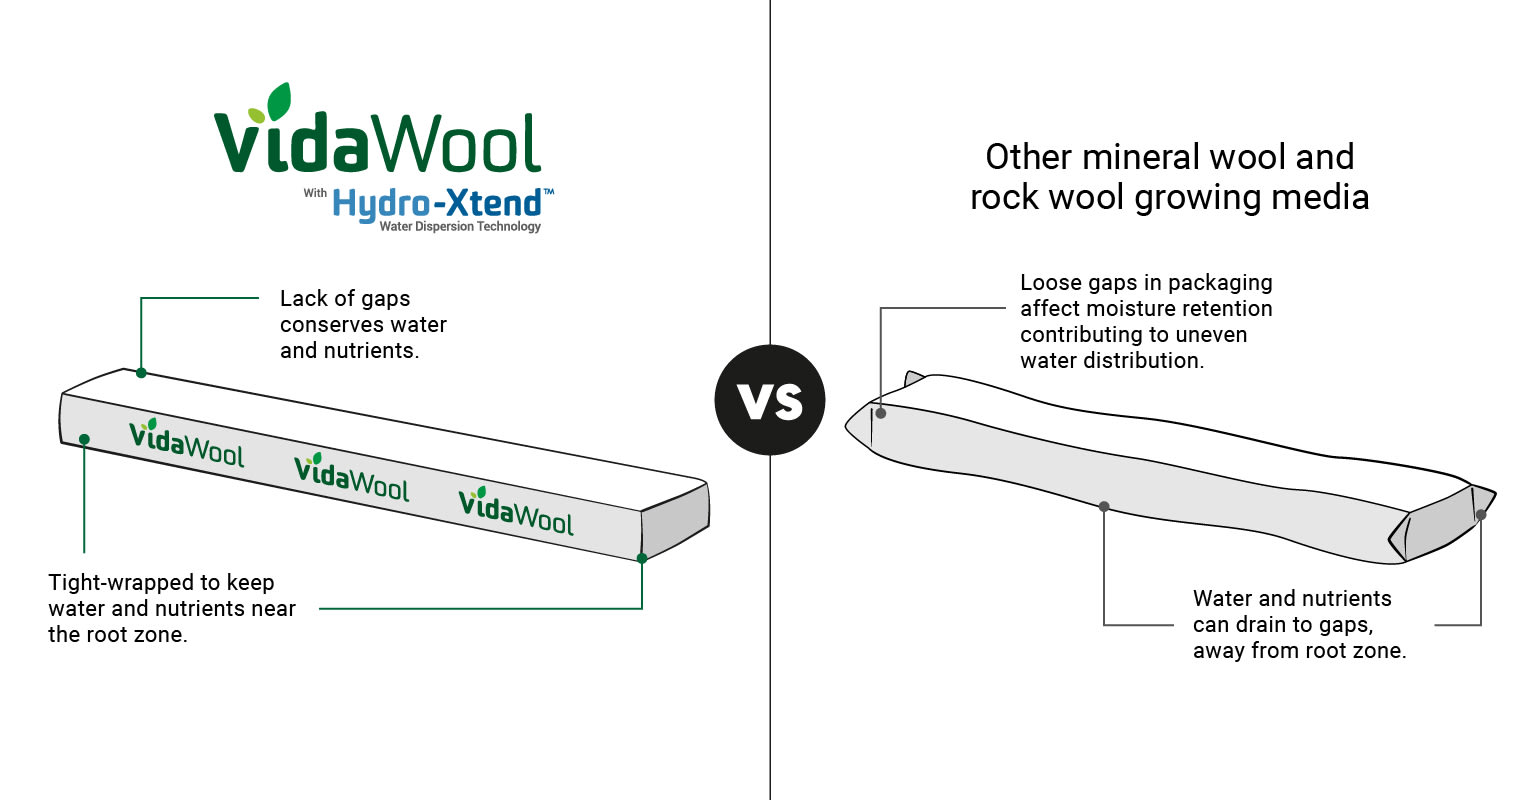 Comparison of VidaWool™ tight-wrapped slabs versus other rock wool growing media.